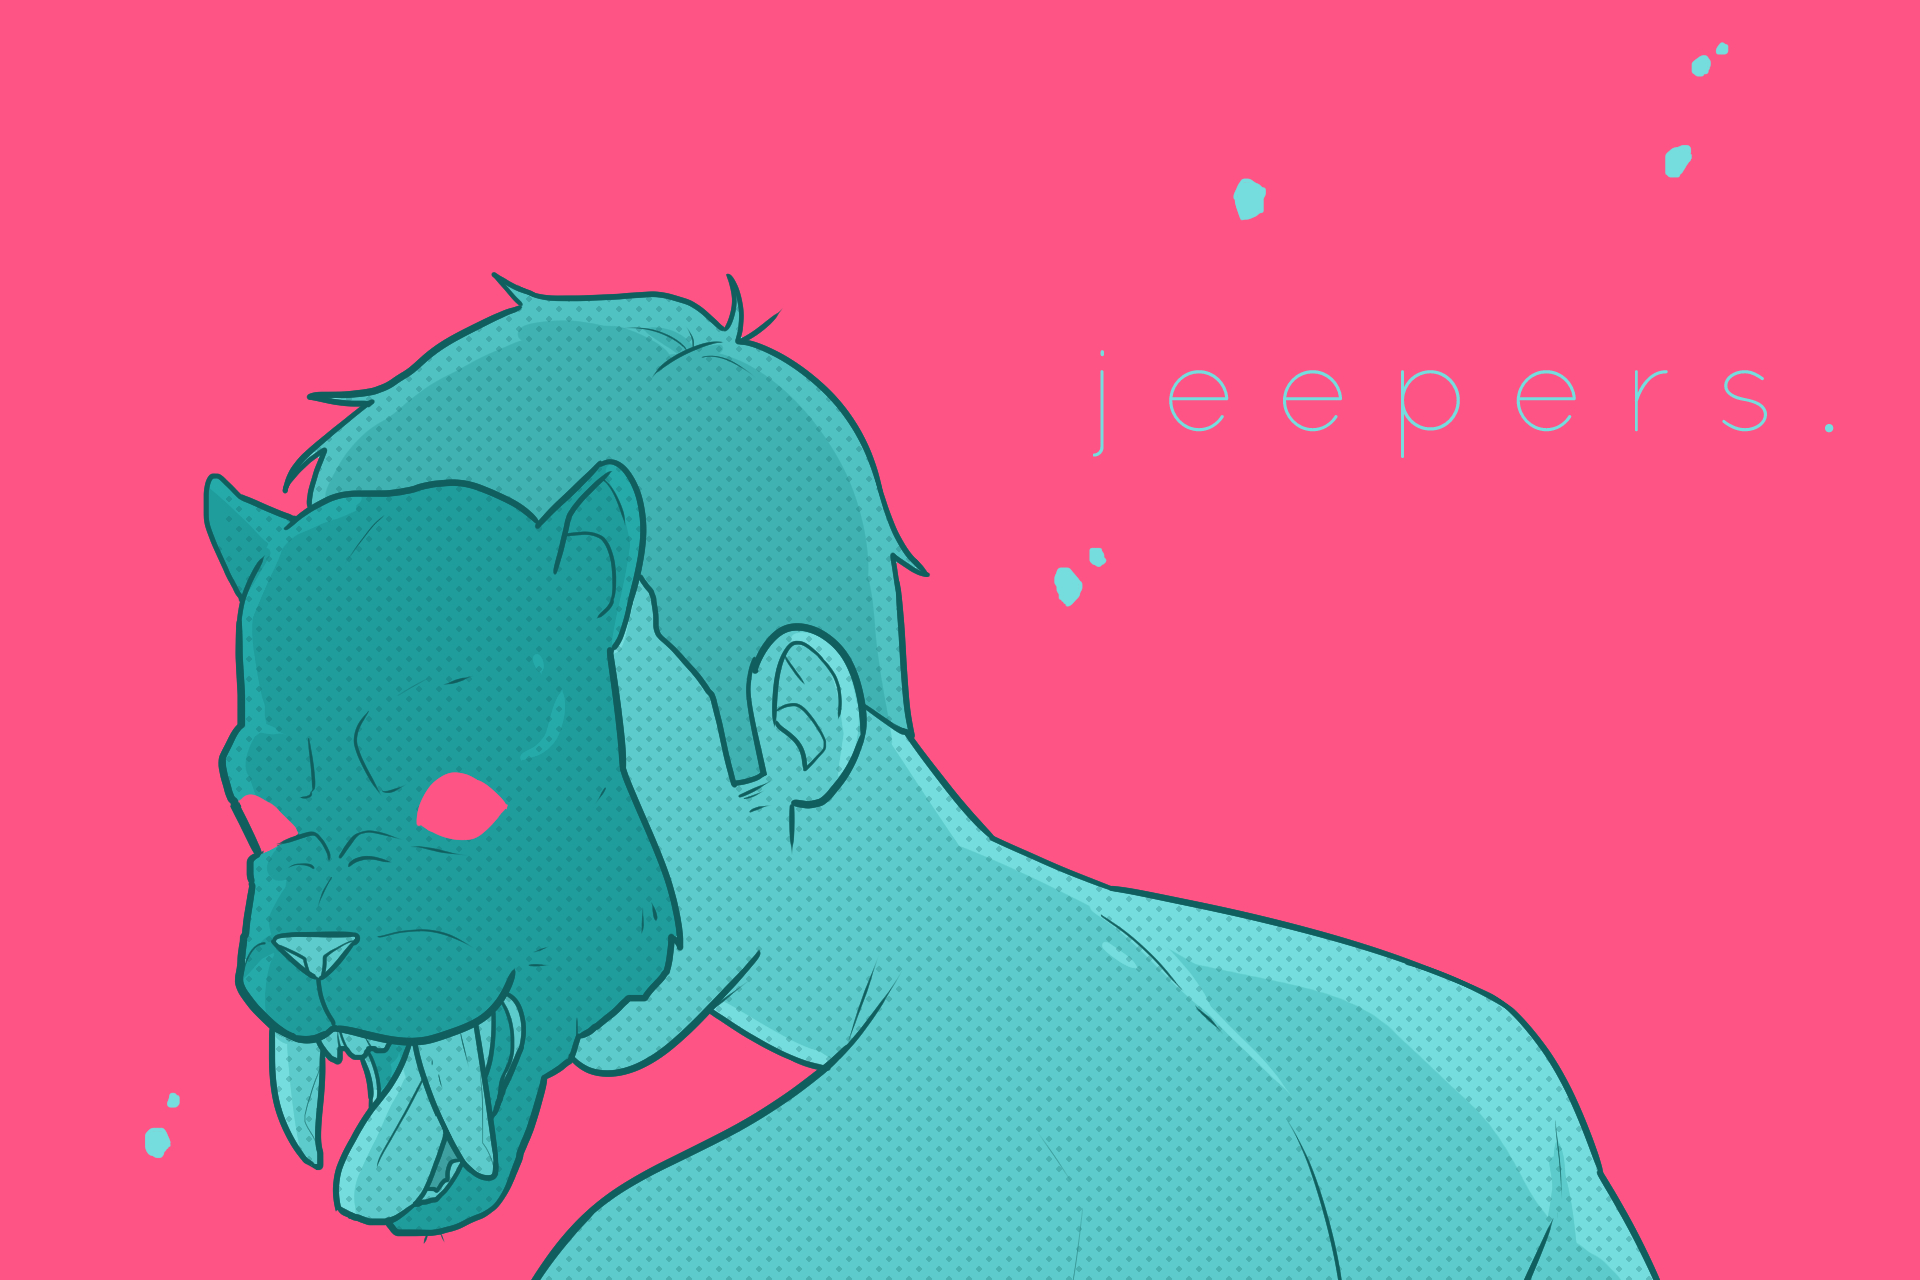   Scooby Dudes  - Episode 23: "Jeepers, It's the Jaguaro!" - Title Card by Sara DuVall 